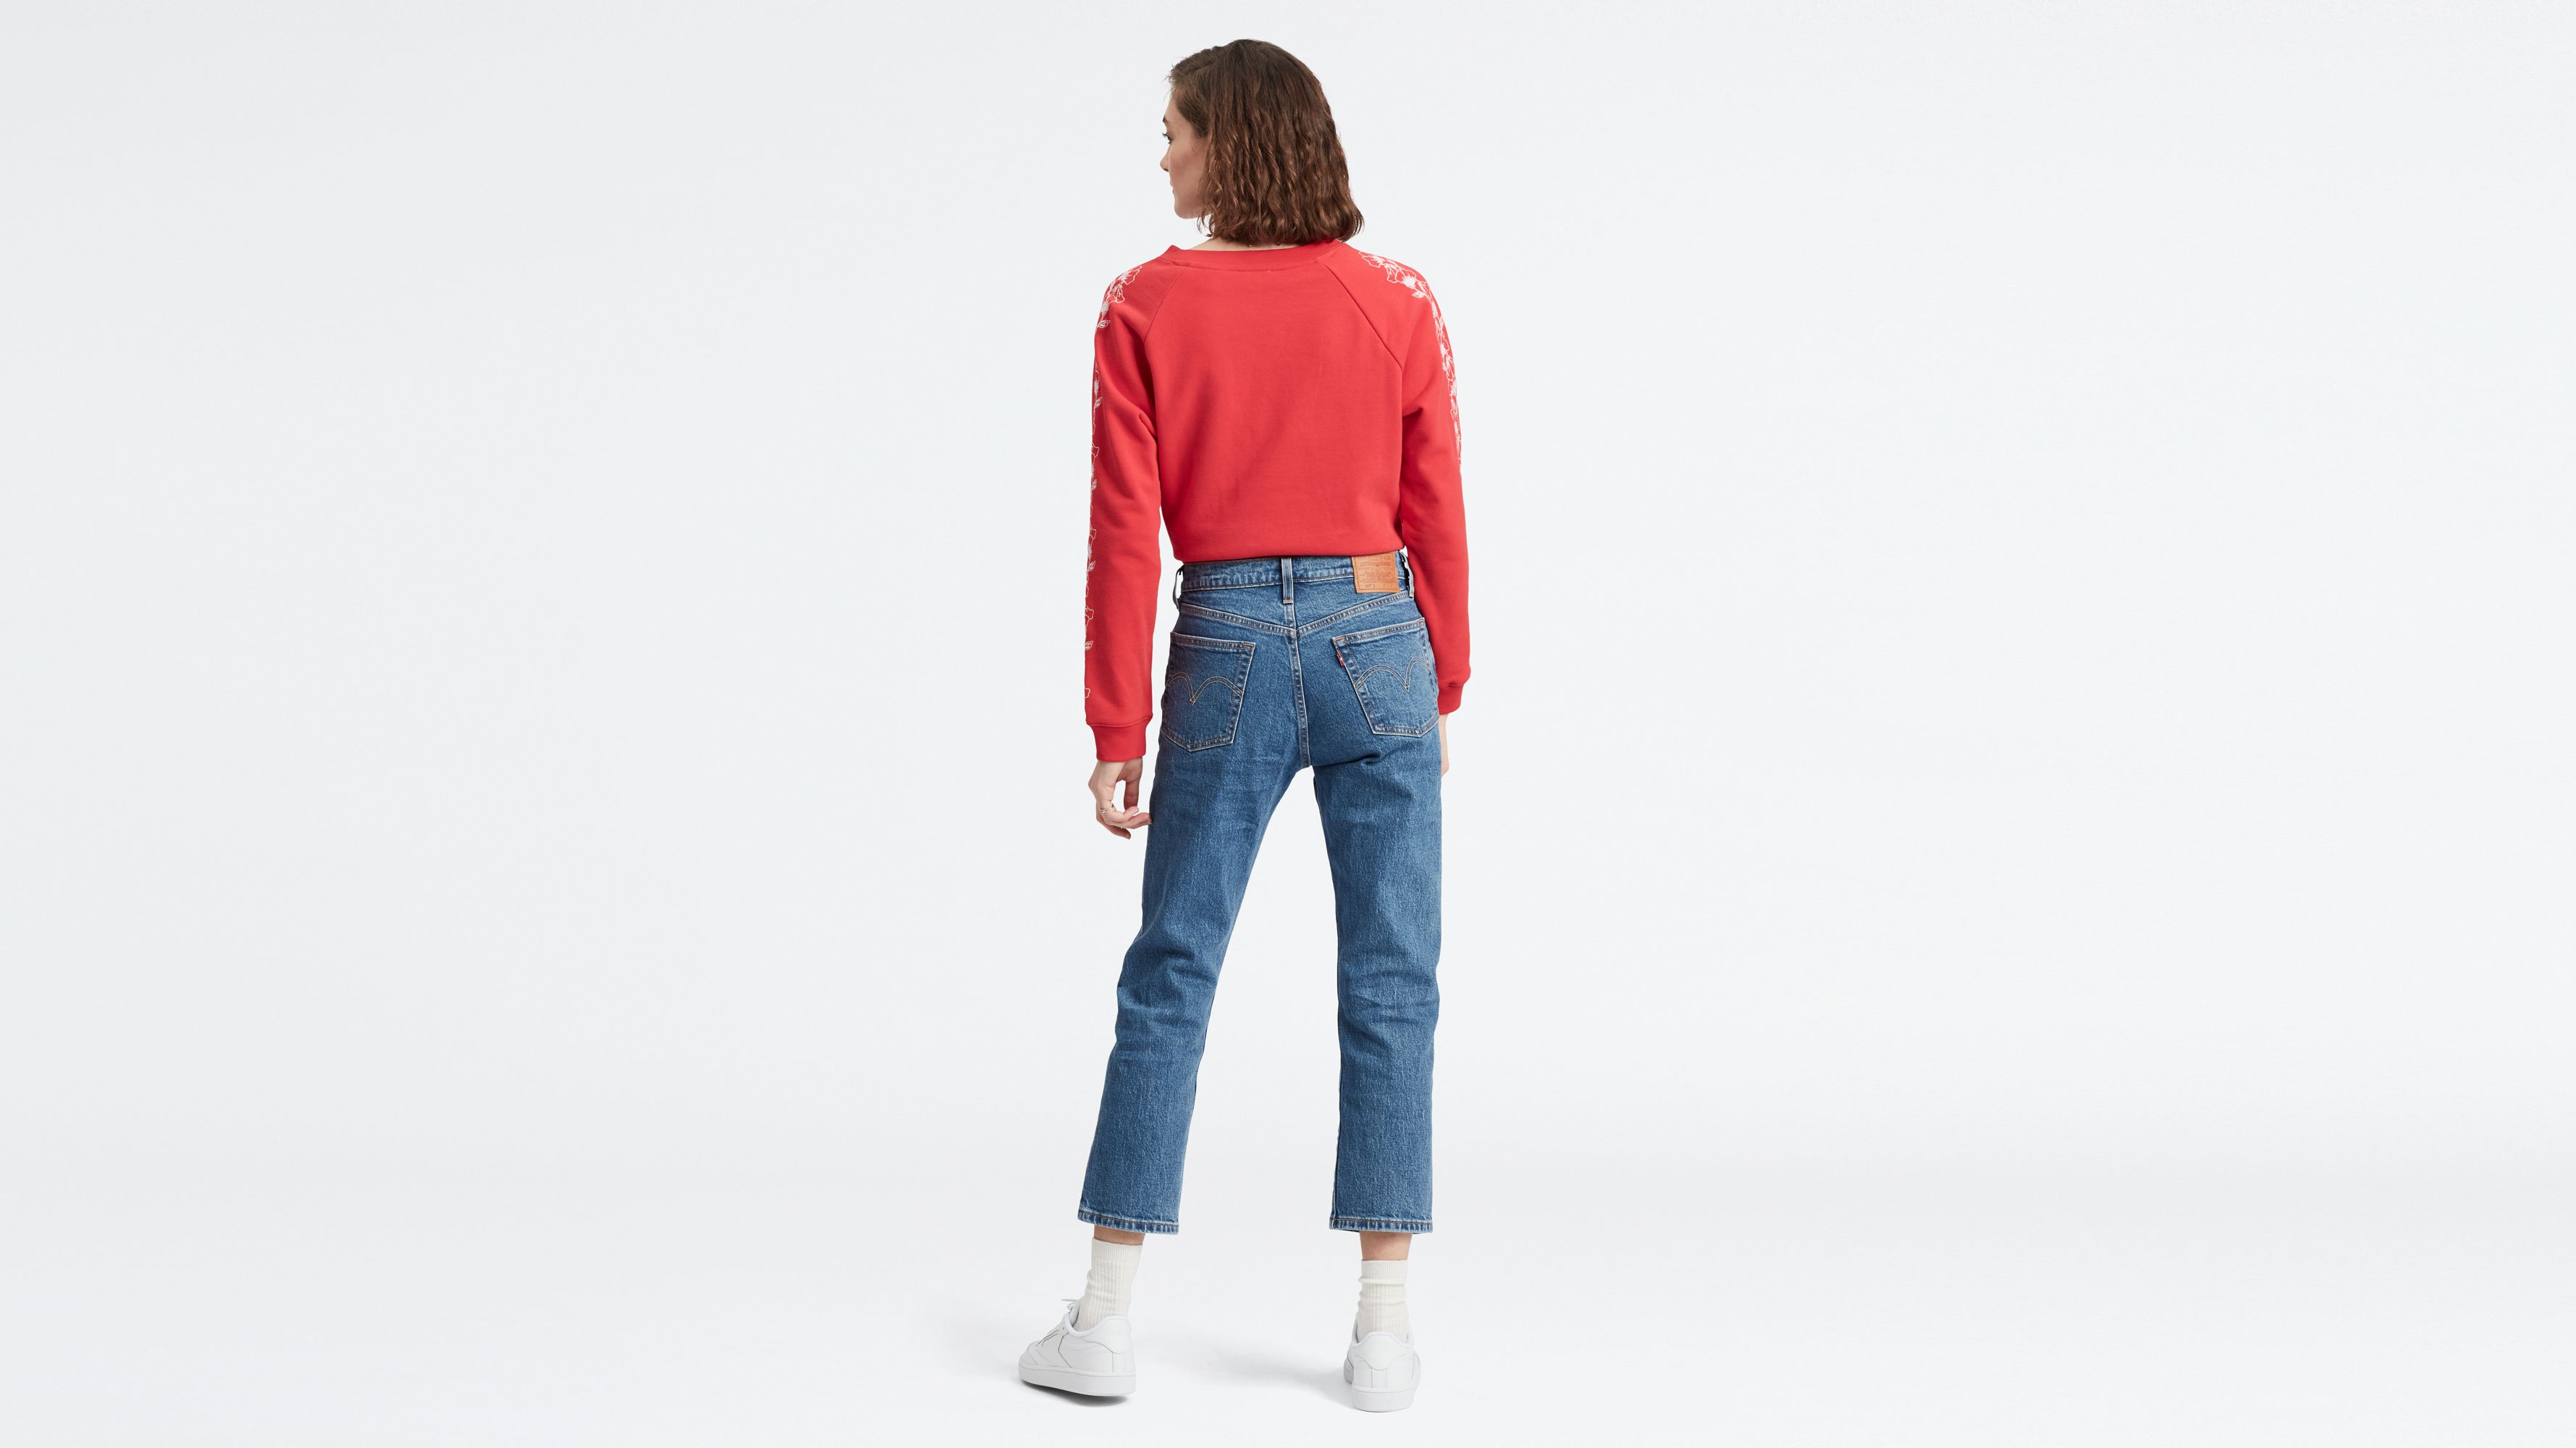 levis jeans cropped Cheaper Than Retail 